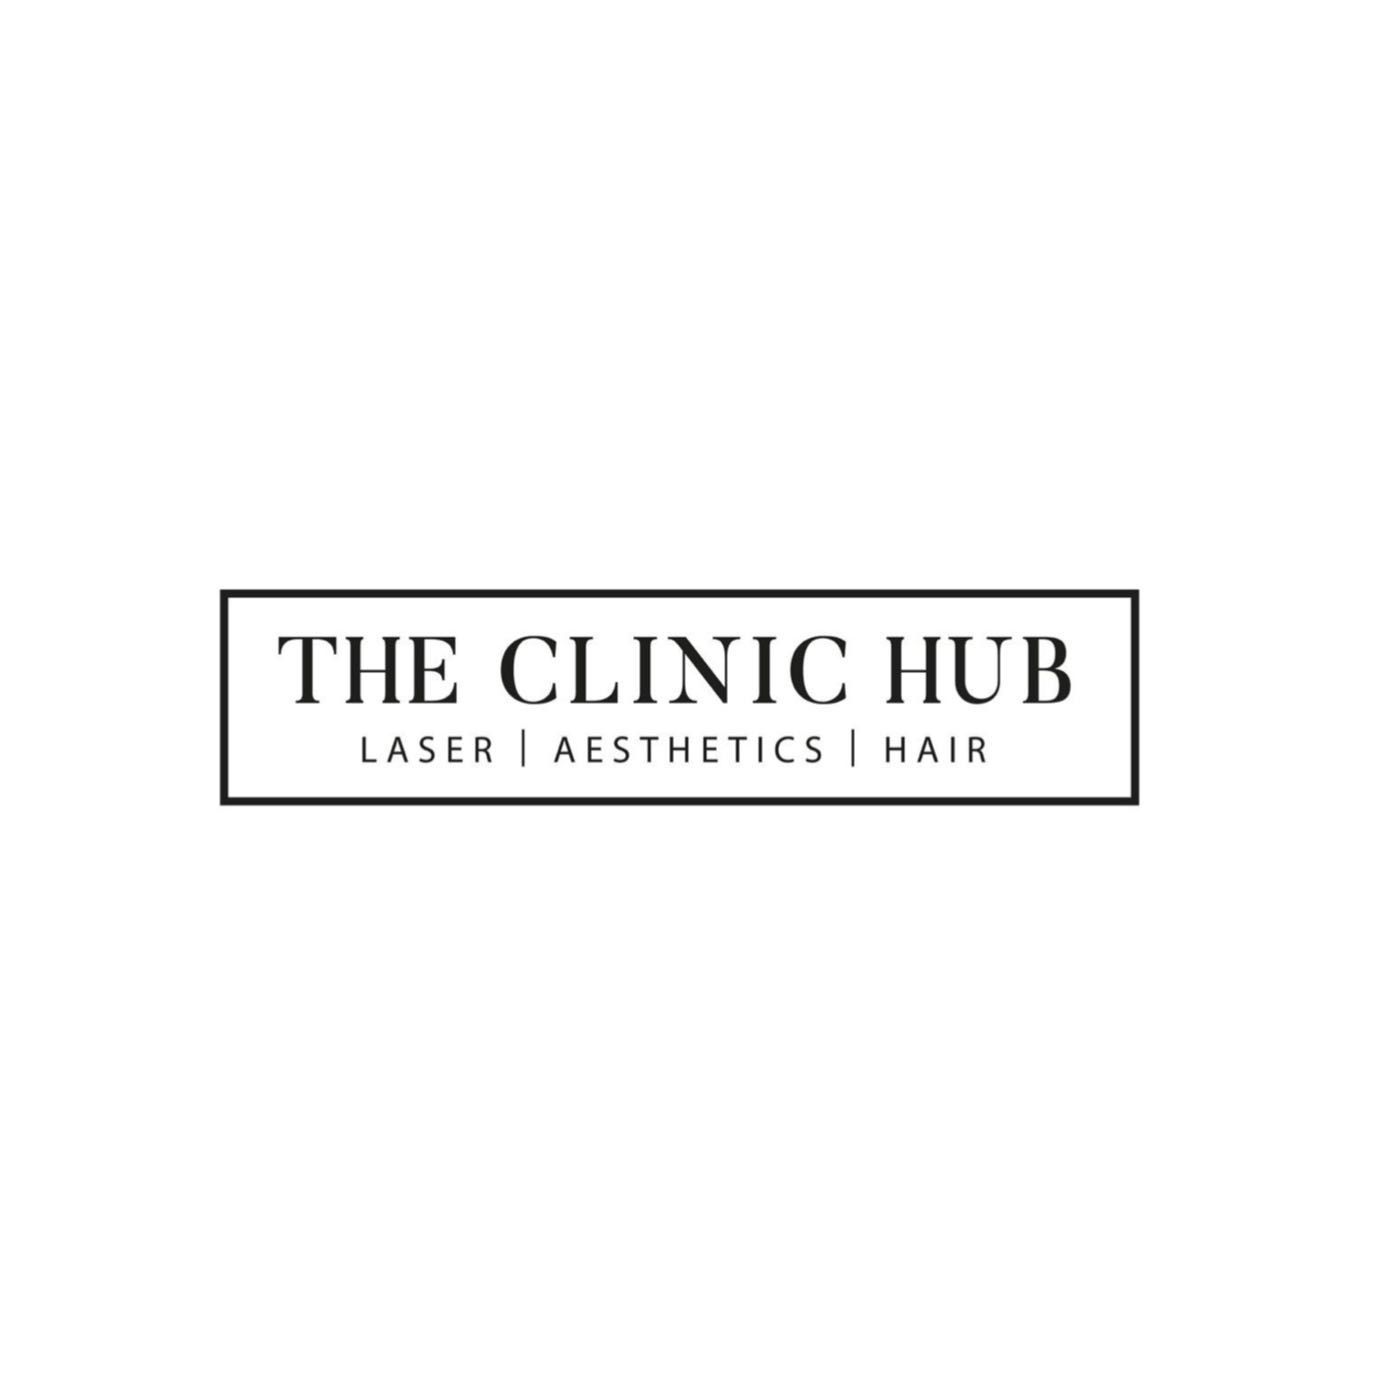 The Clinic Hub, 87a Chester Road, 87a, Sutton Coldfield